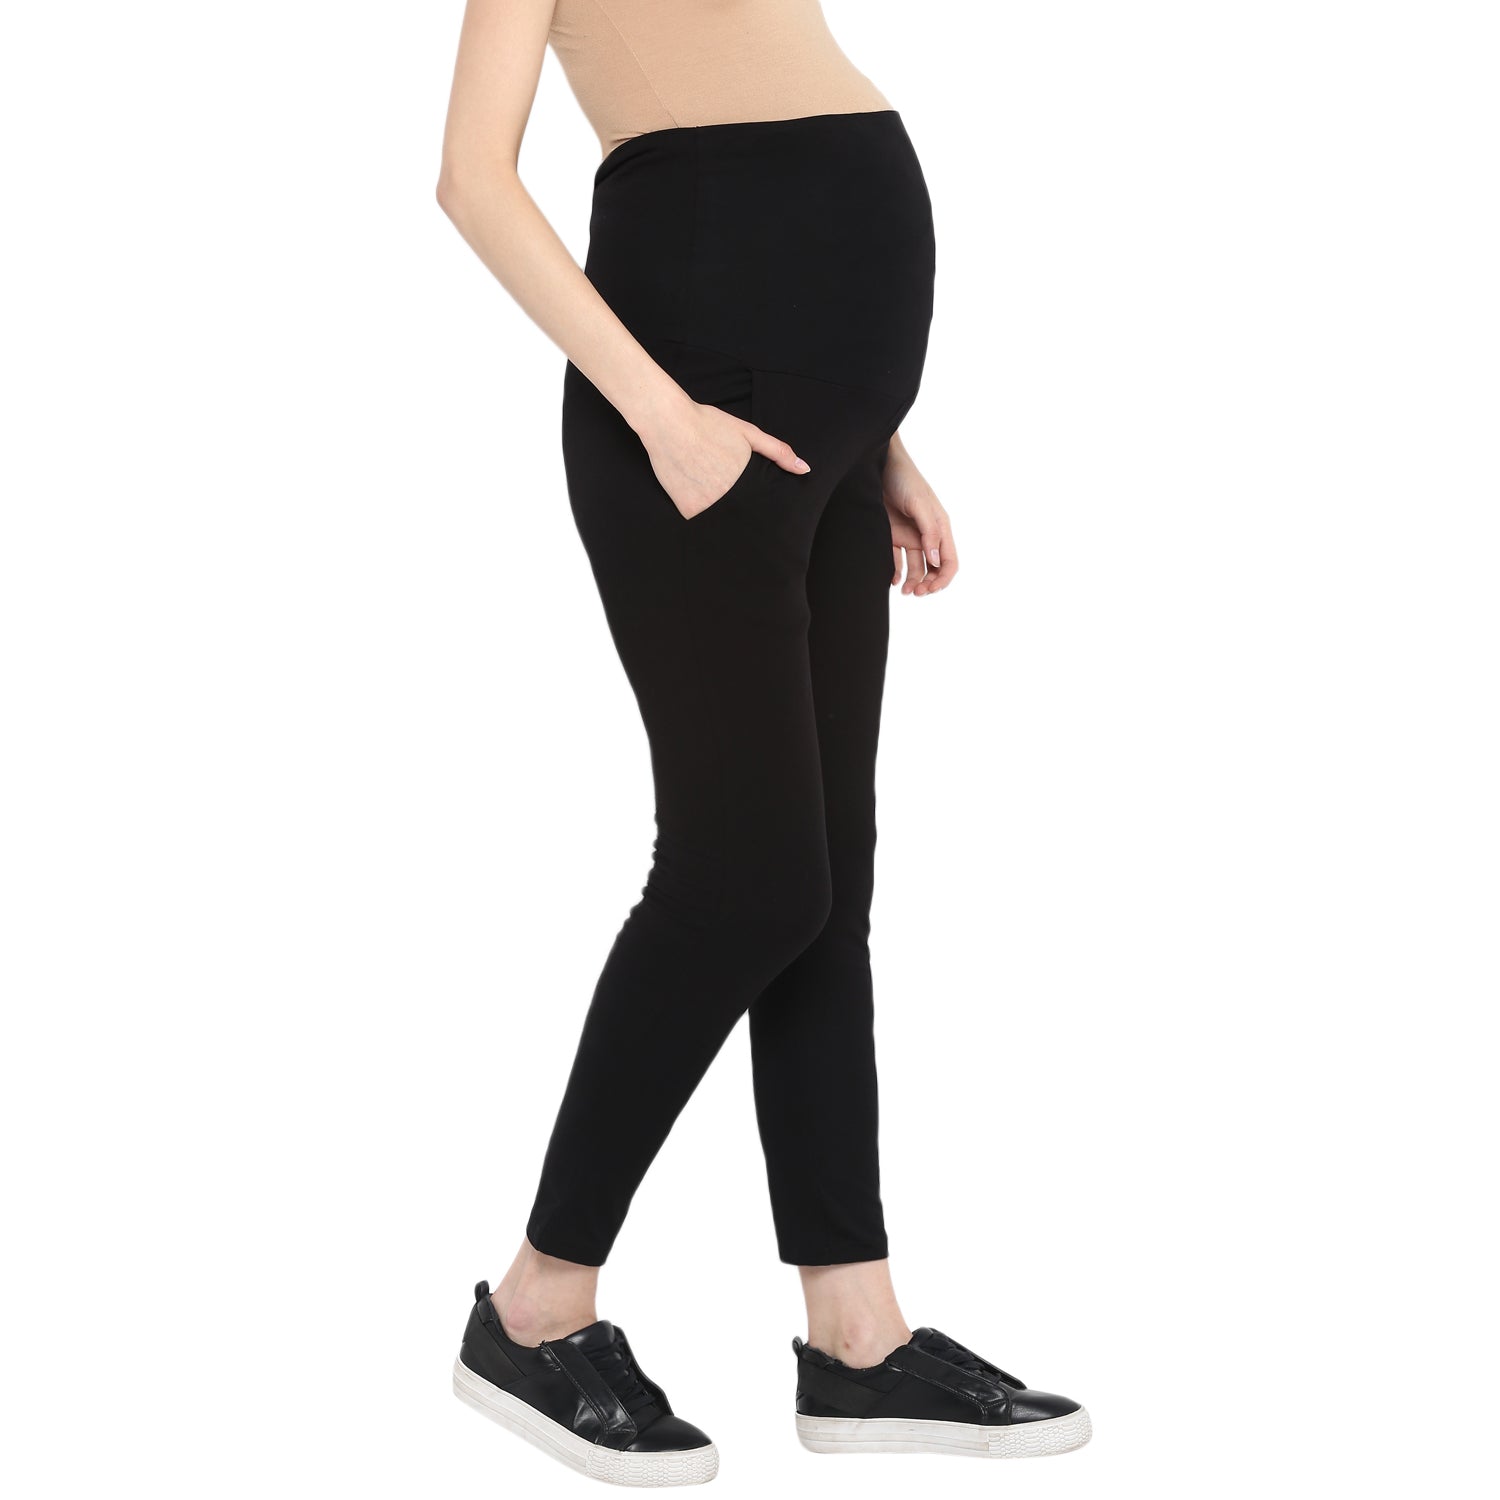 *New* Motherhood Maternity Black Maternity Pants with Raised Black Dots |  New With Tags - Size Small